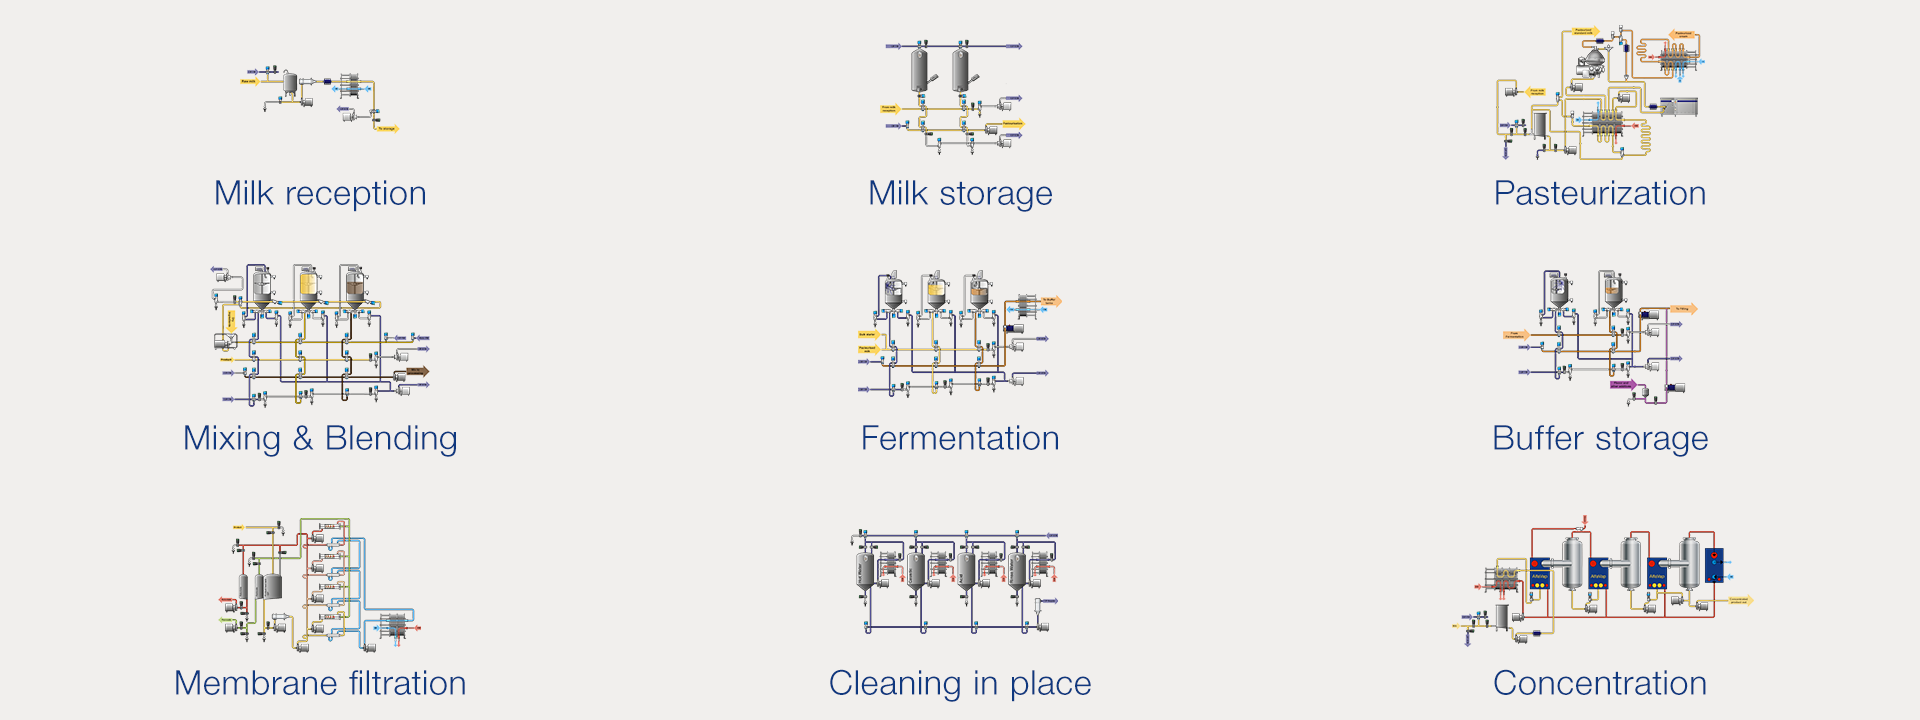 Dairy processing overview